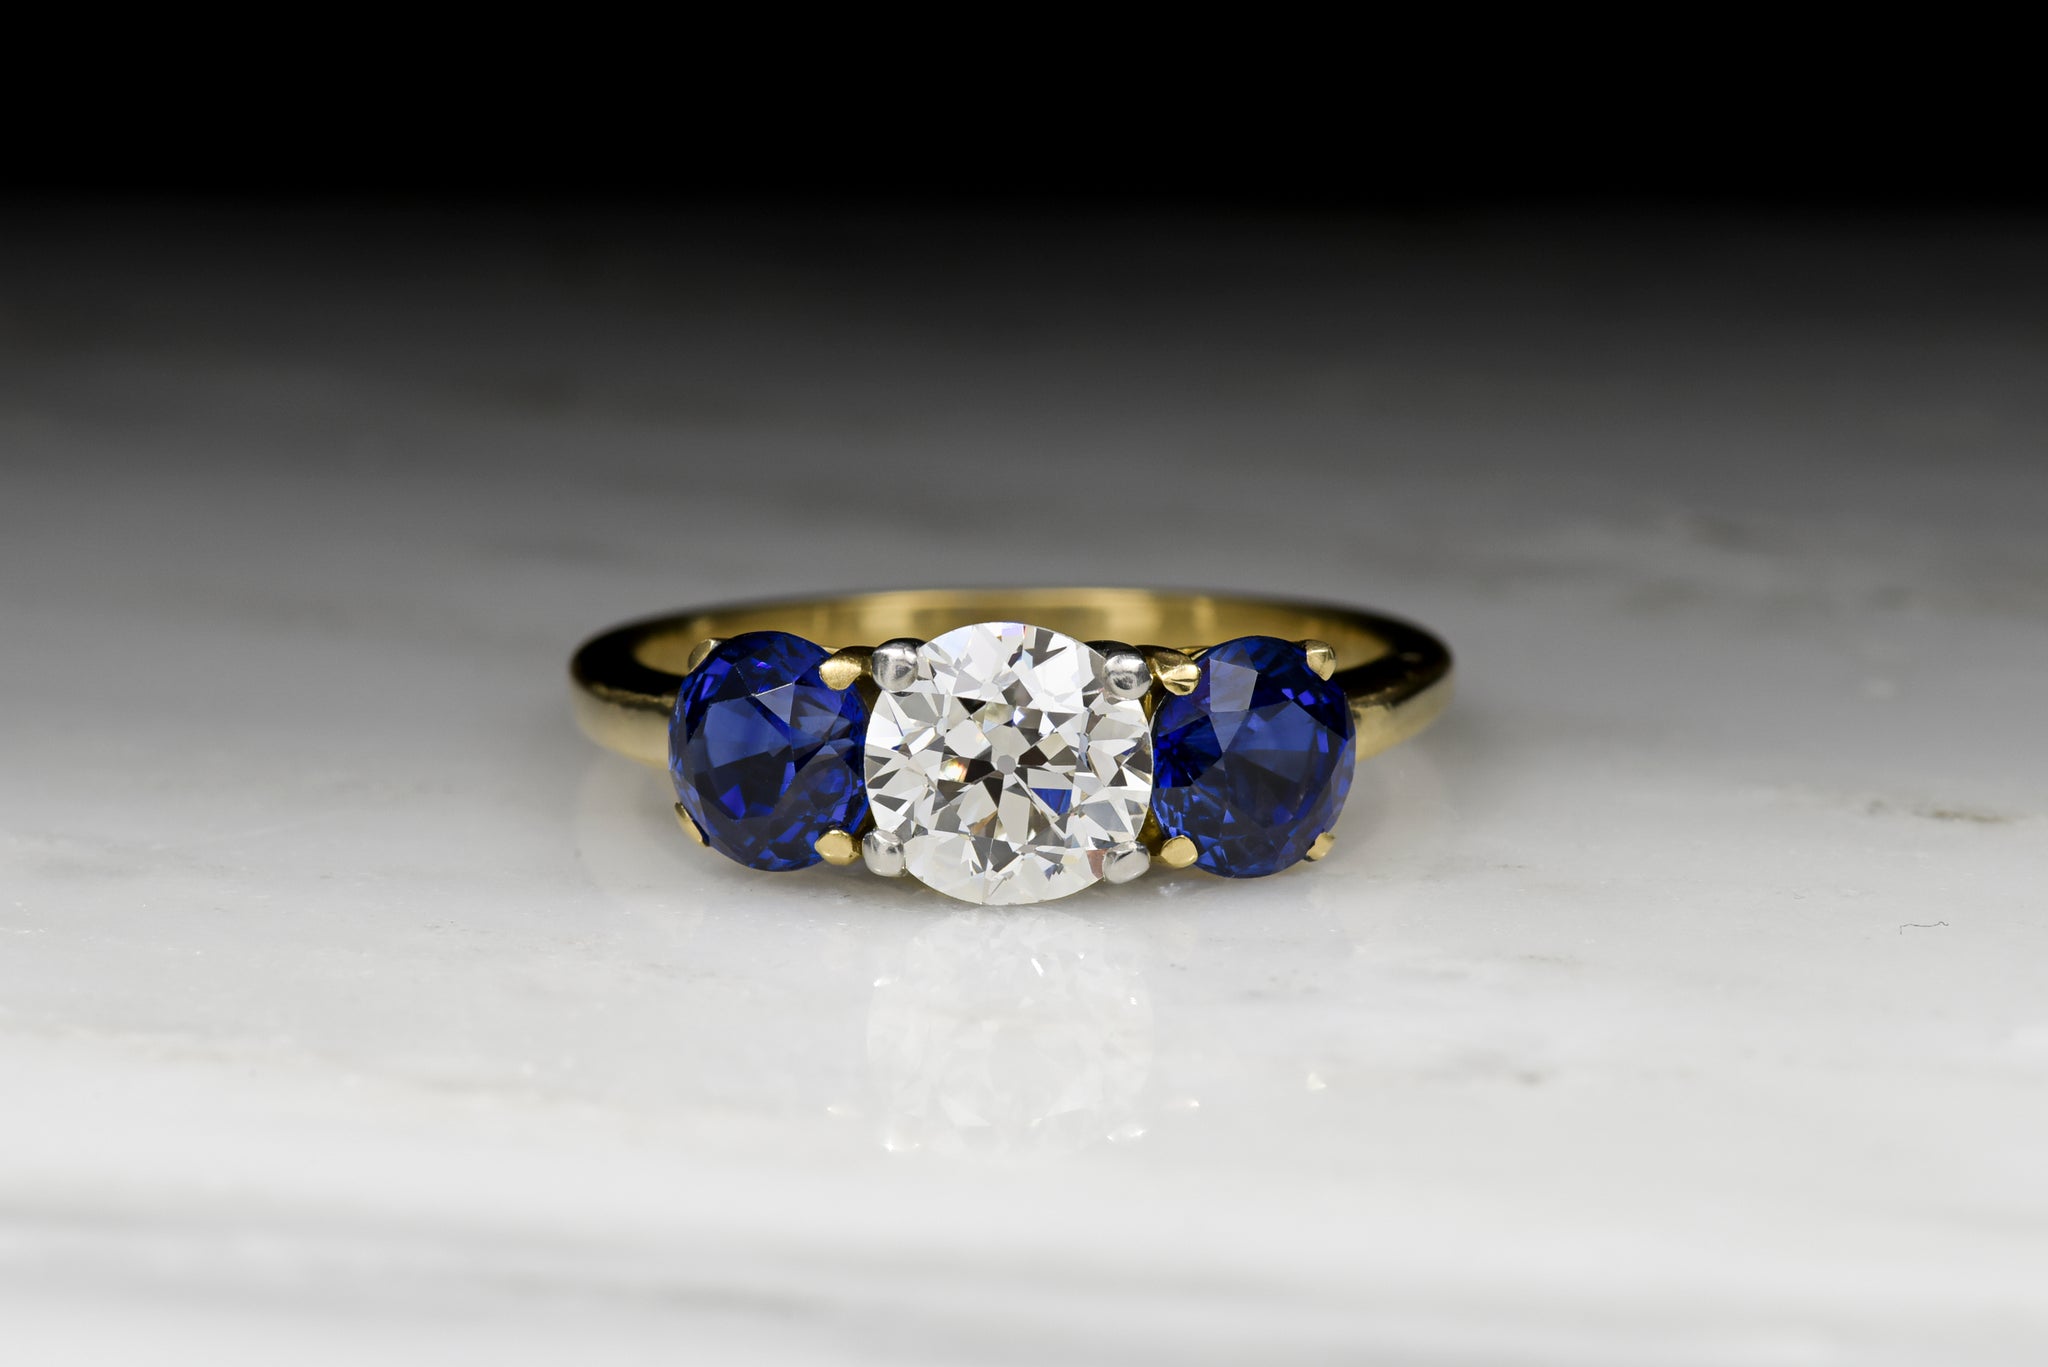 Vintage Tiffany & Co. Old European Cut Diamond and Sapphire Ring ...